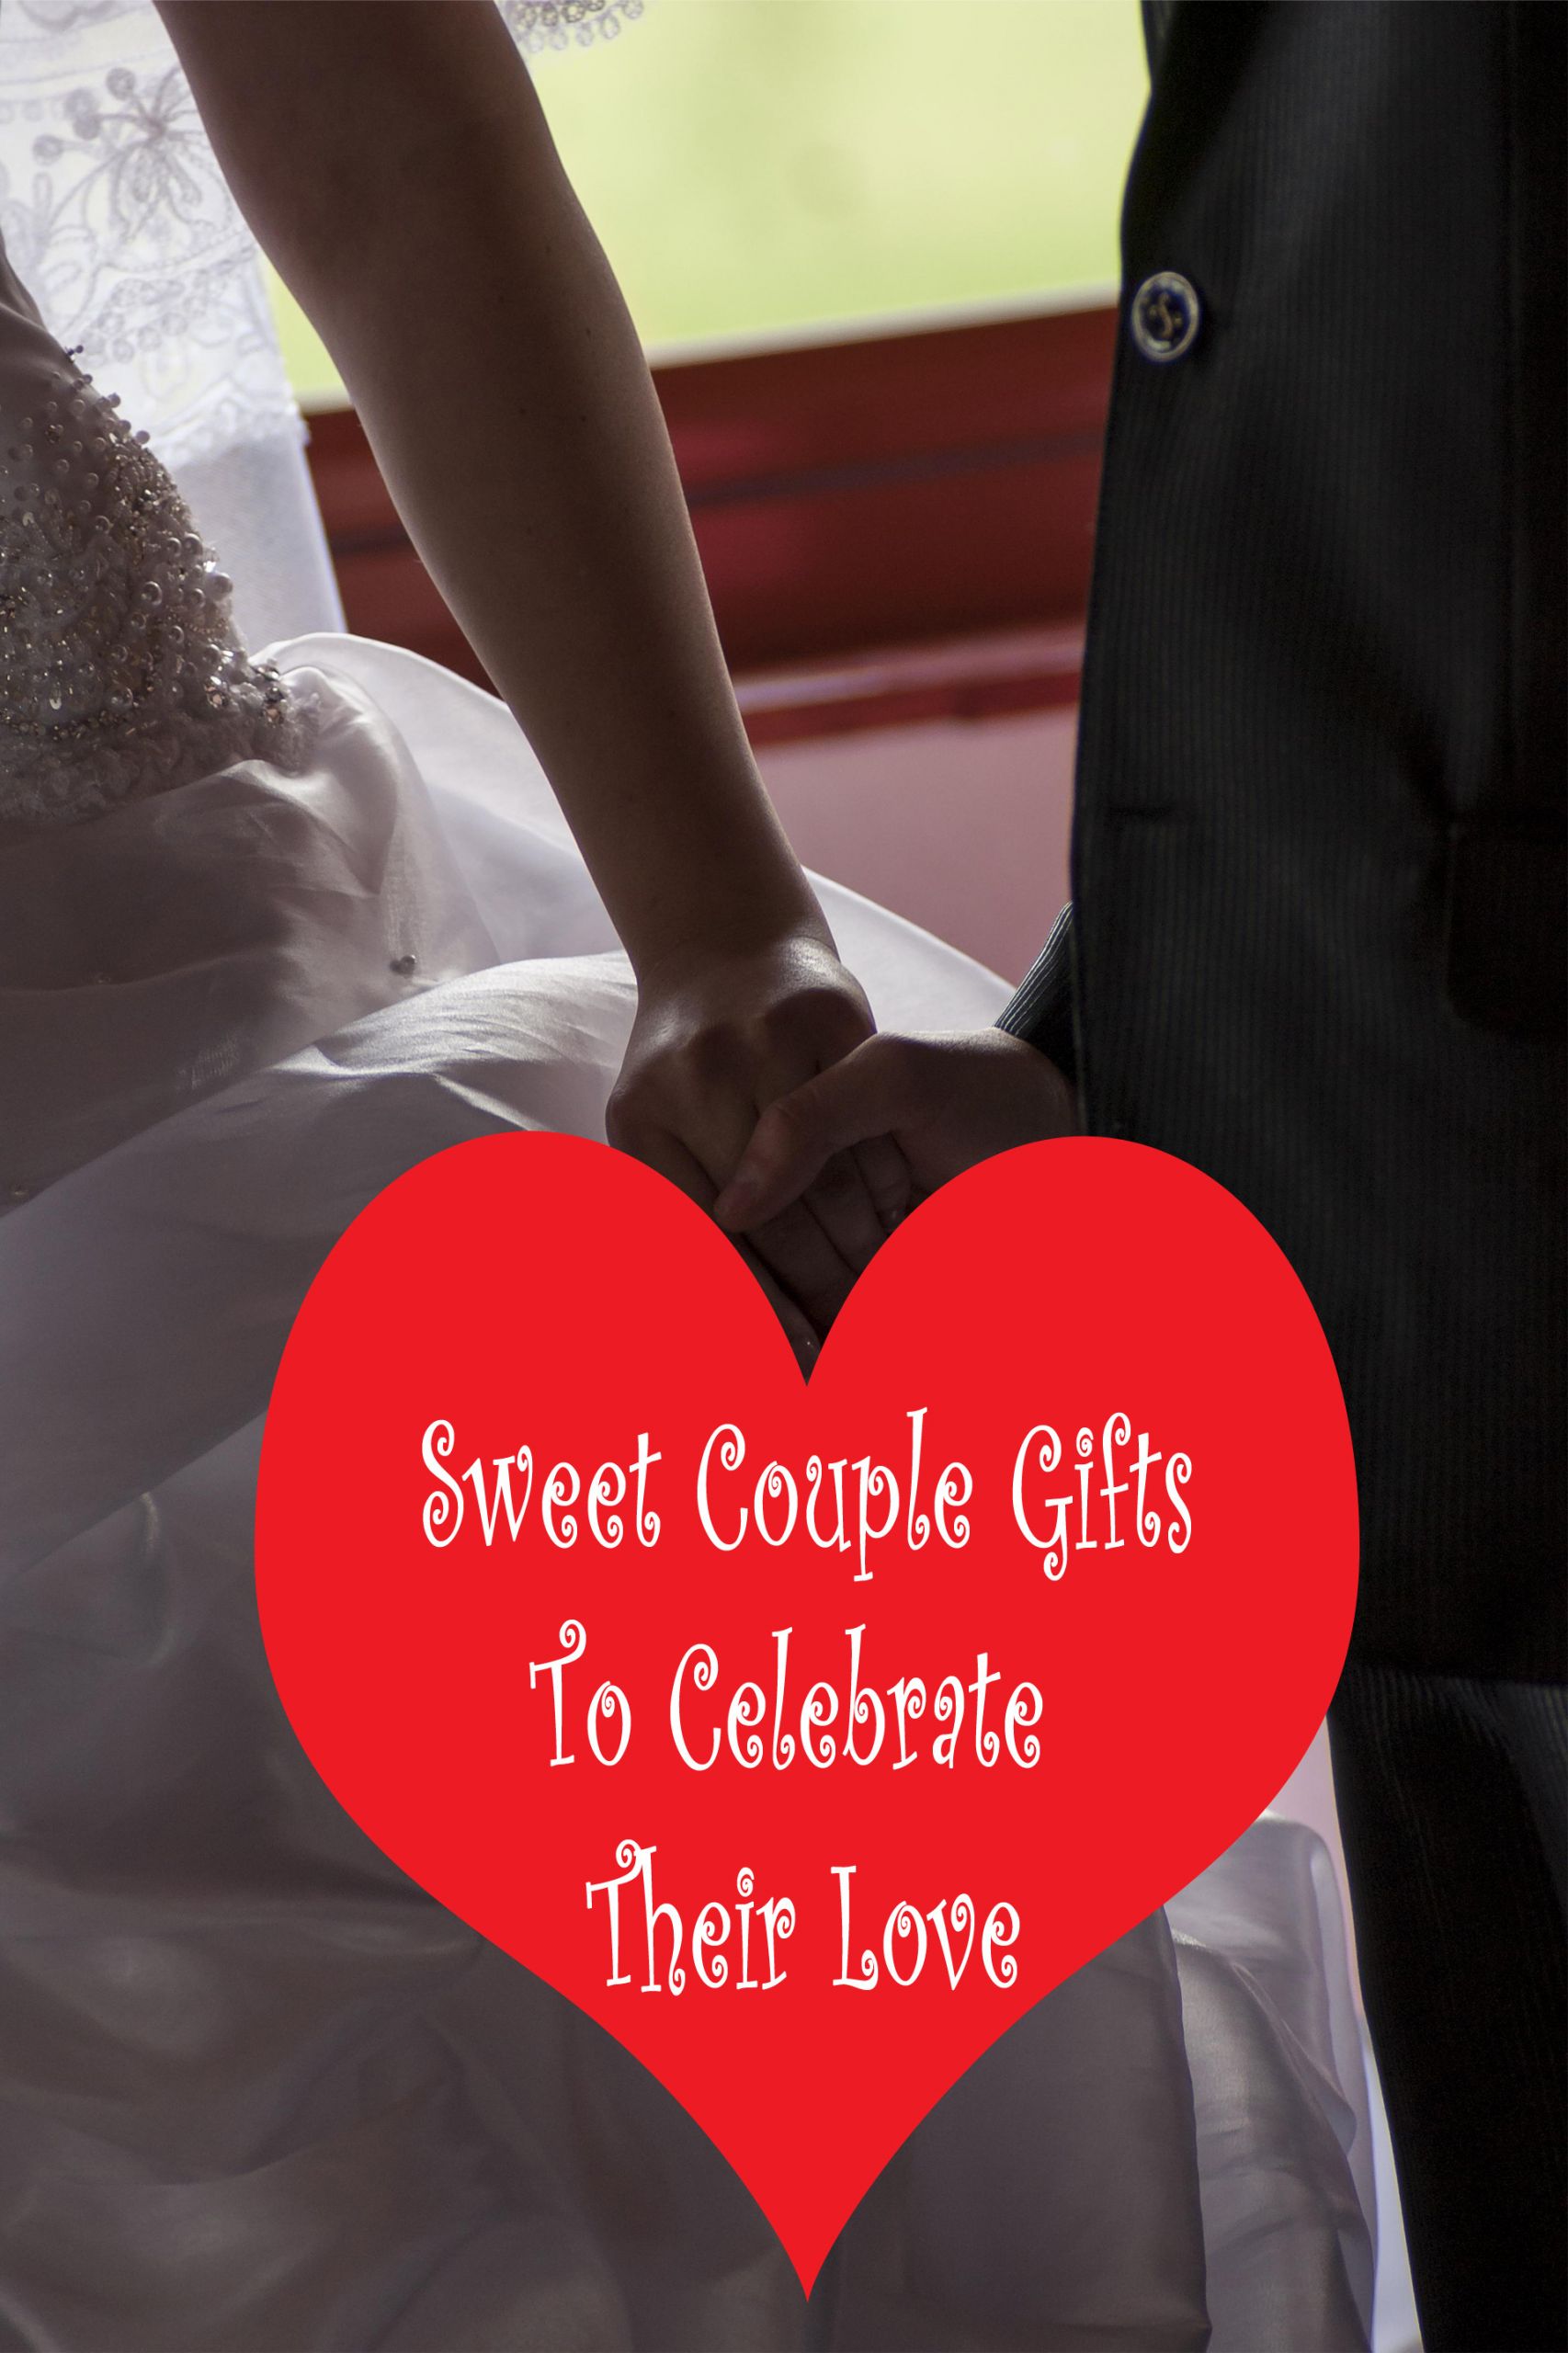 Good Gift Ideas For Couples
 Adorably Cute and Good Couples Gifts